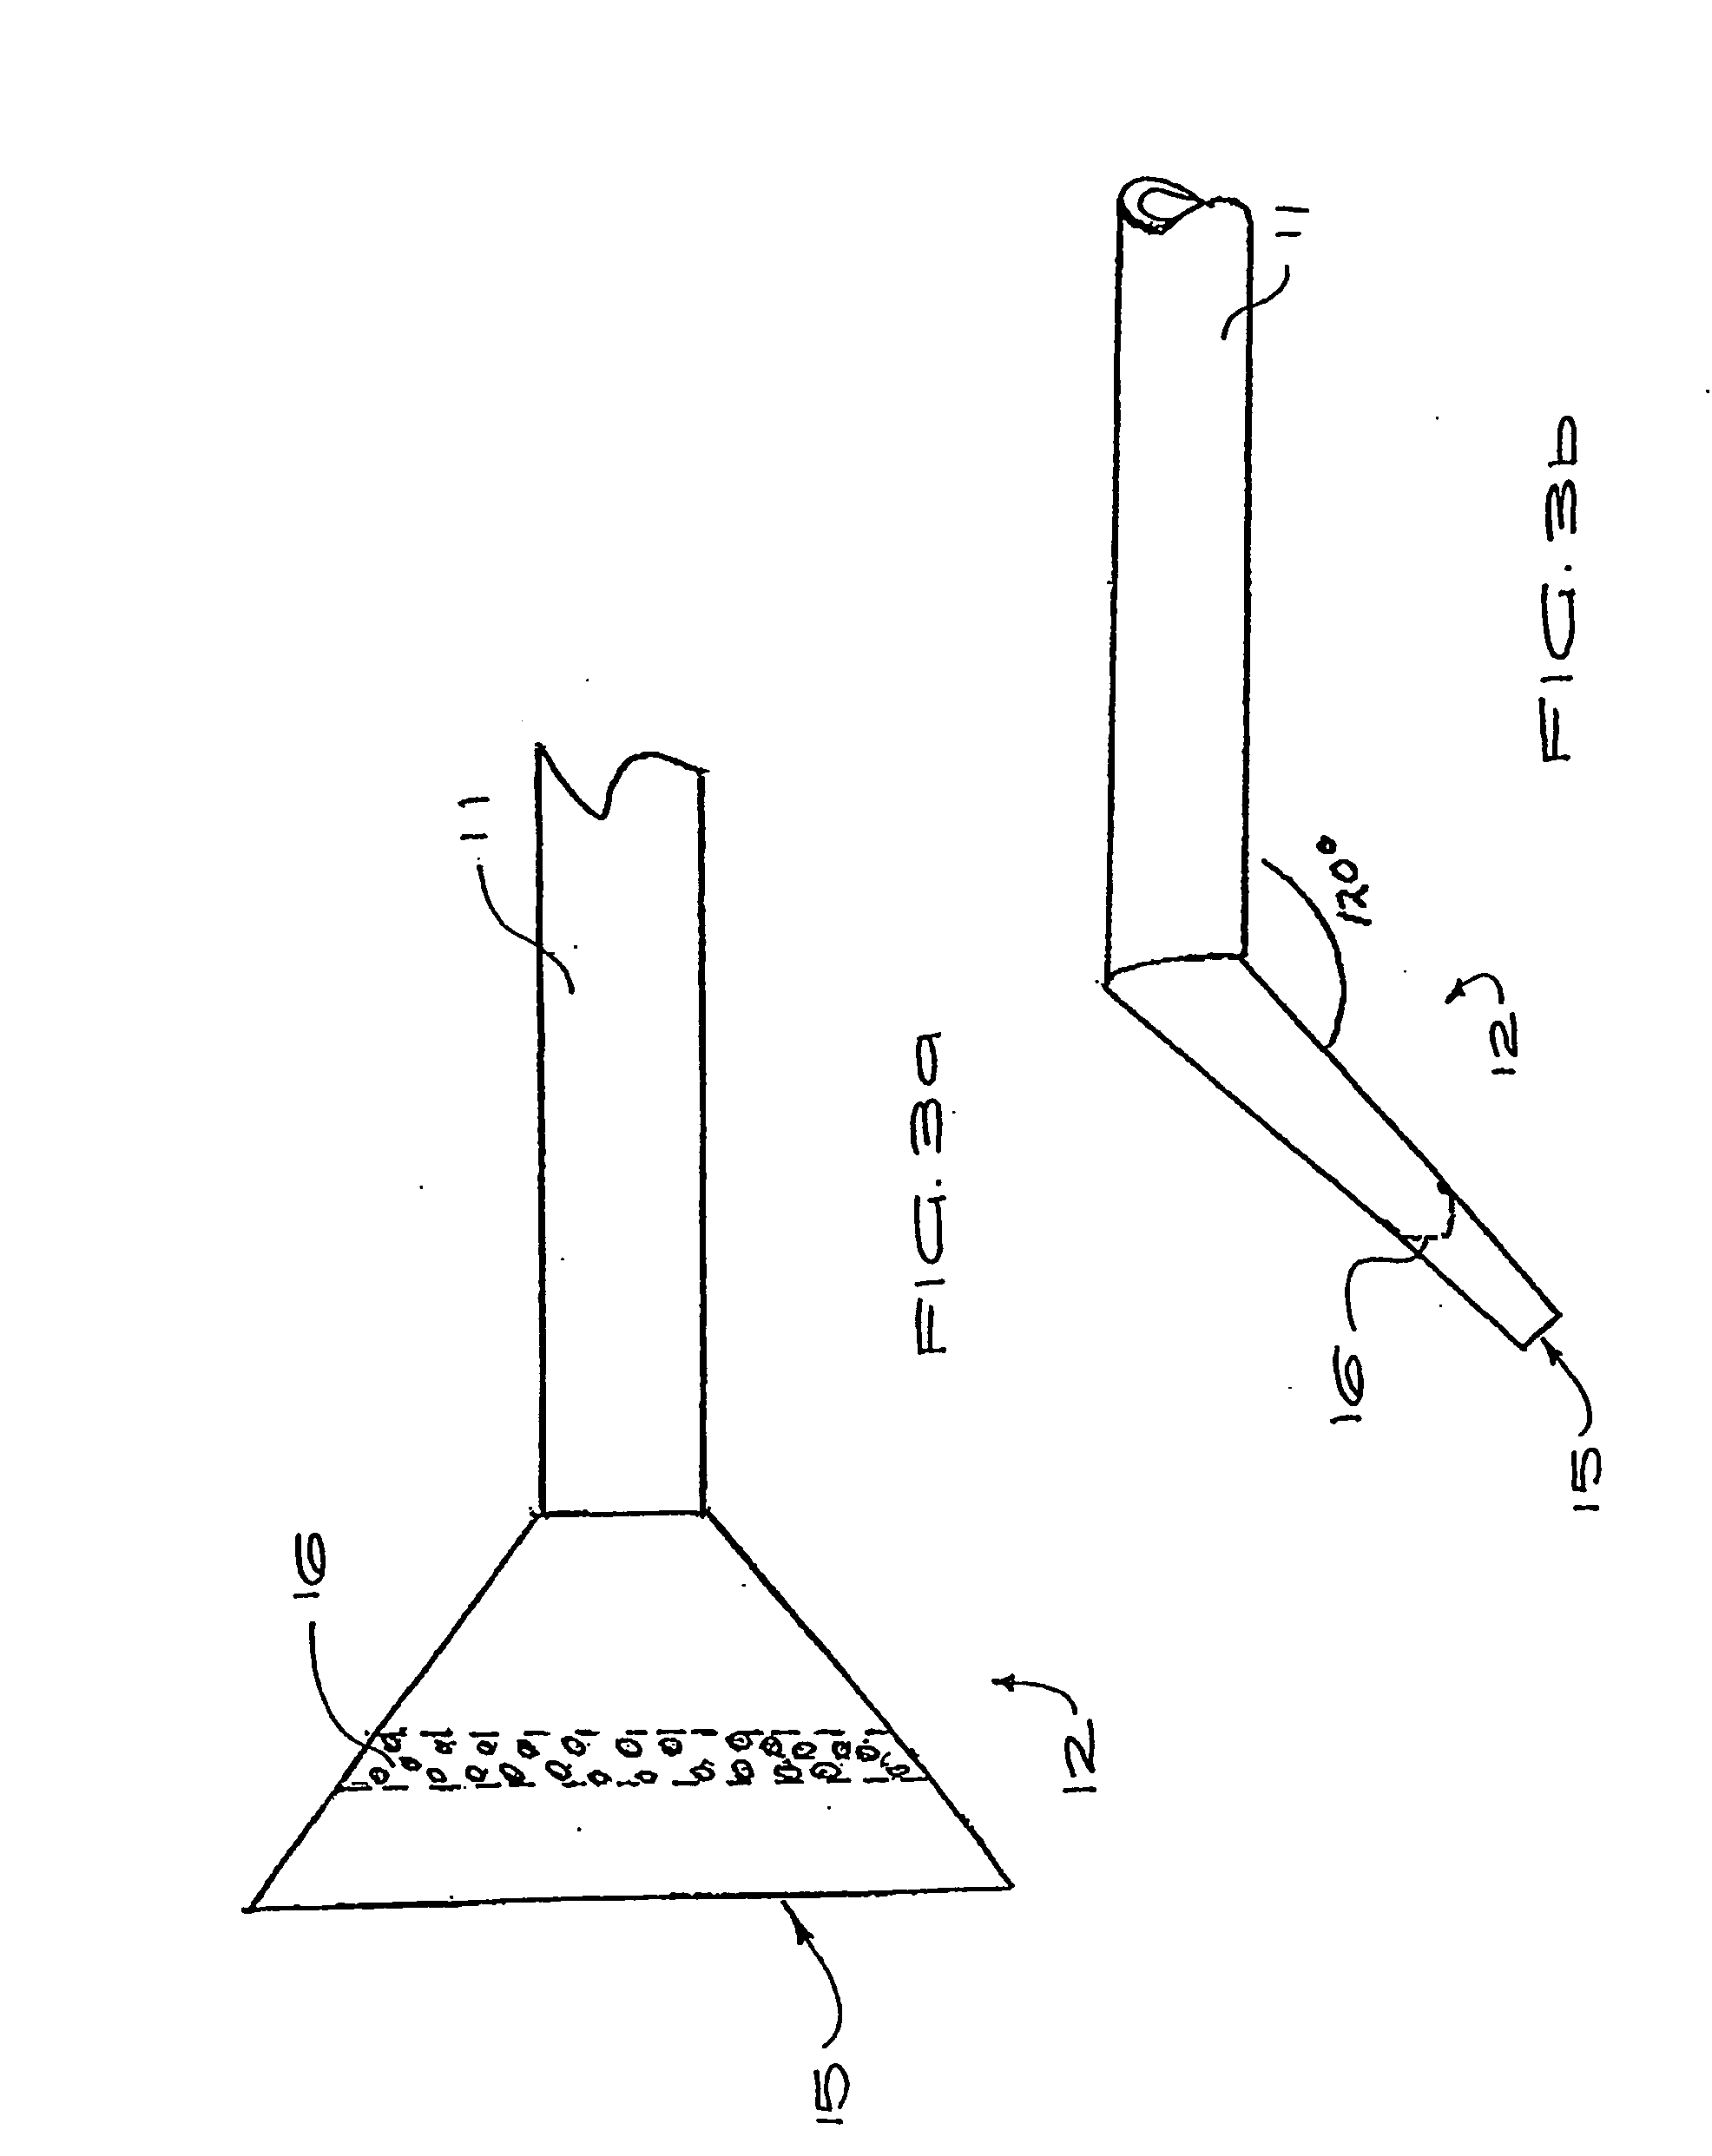 Method and apparatus for weed control with hot foam